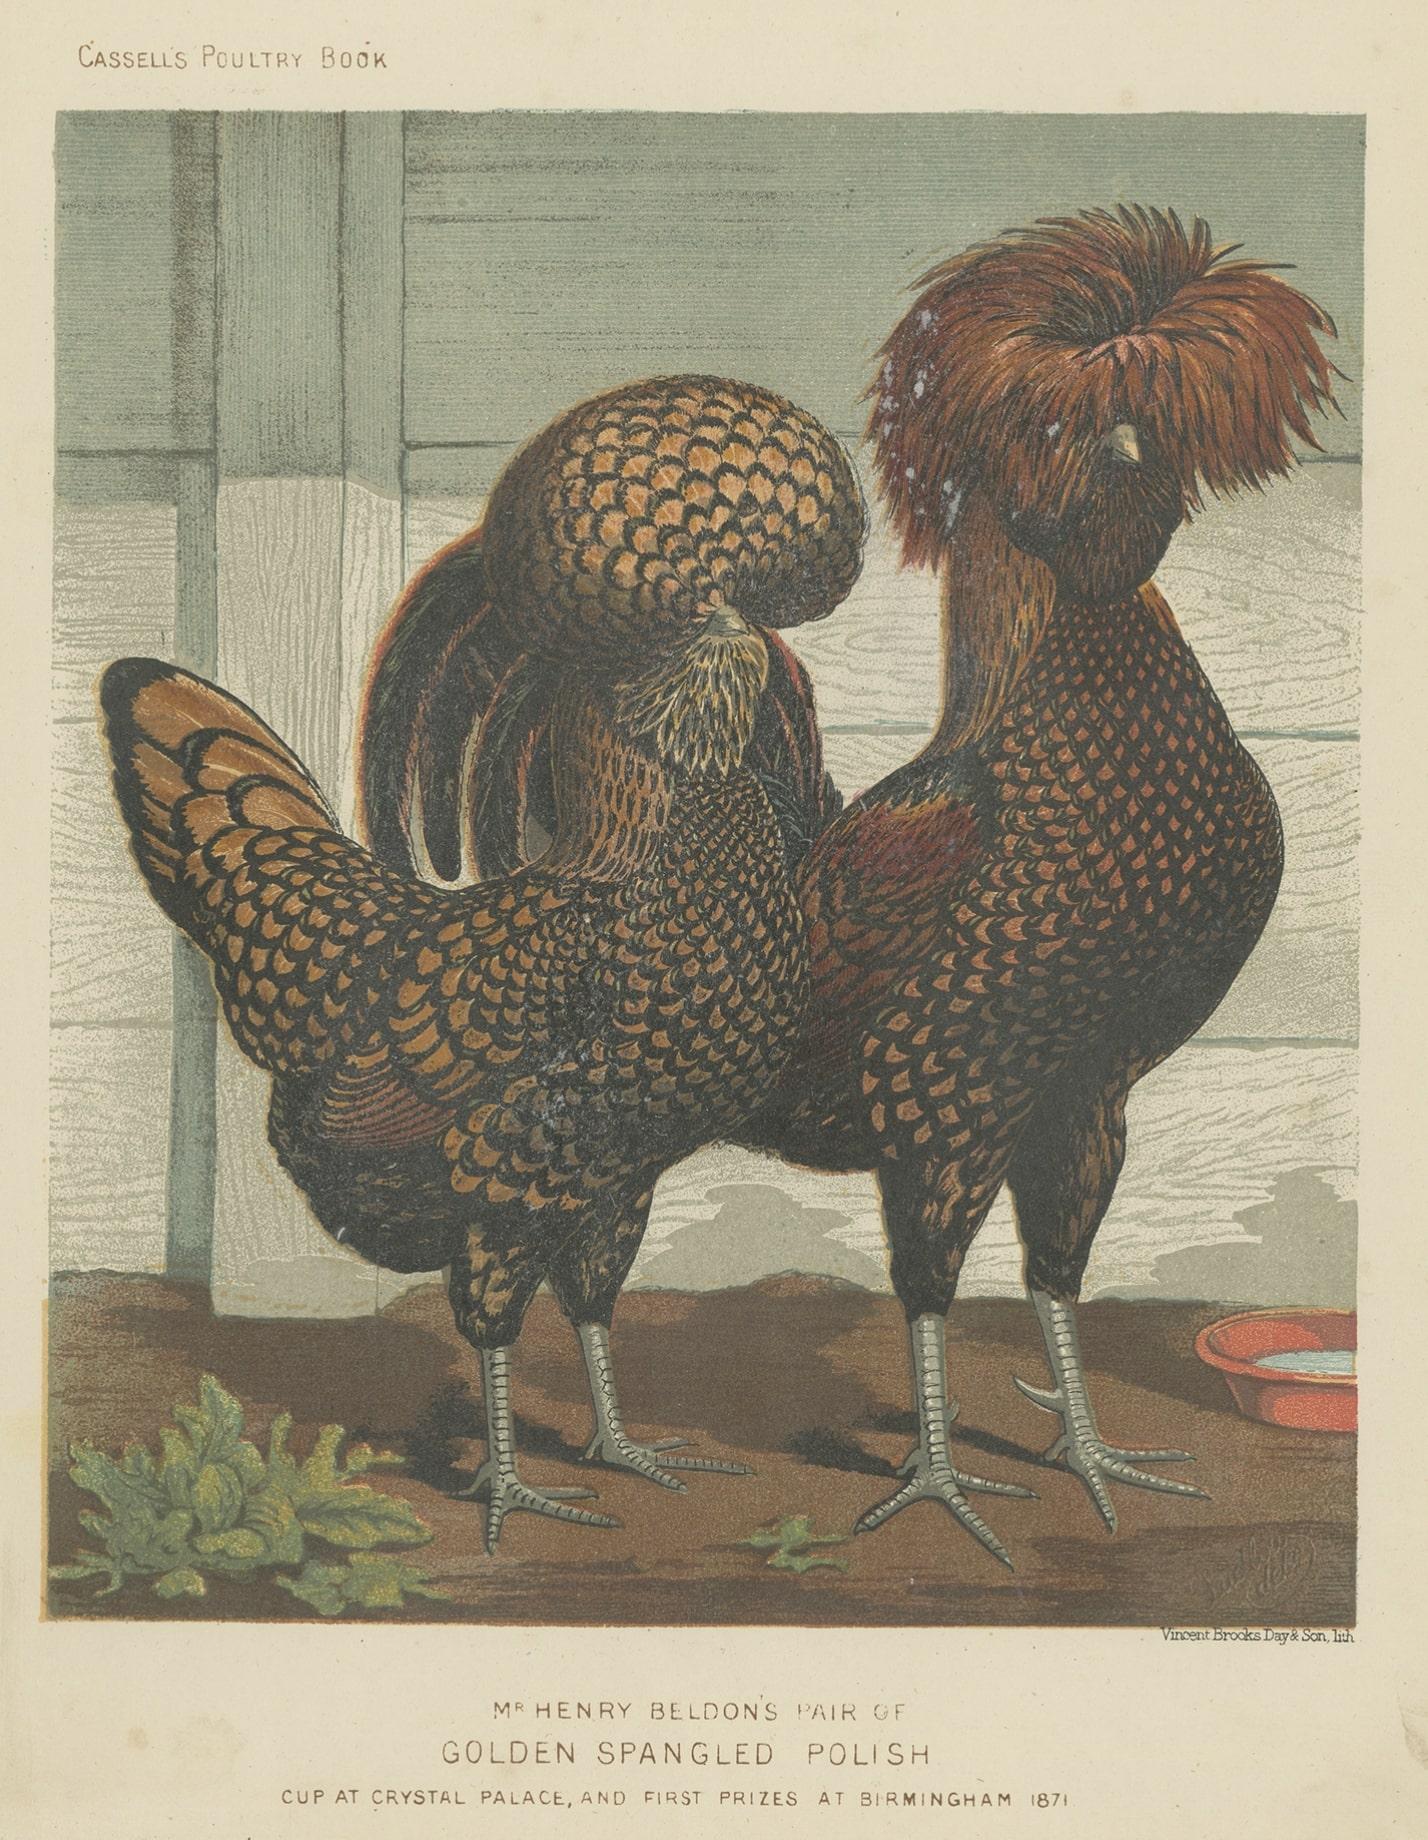 19th Century Antique Print of Golden Spangled Polish Chicken by Cassell (c.1880) For Sale